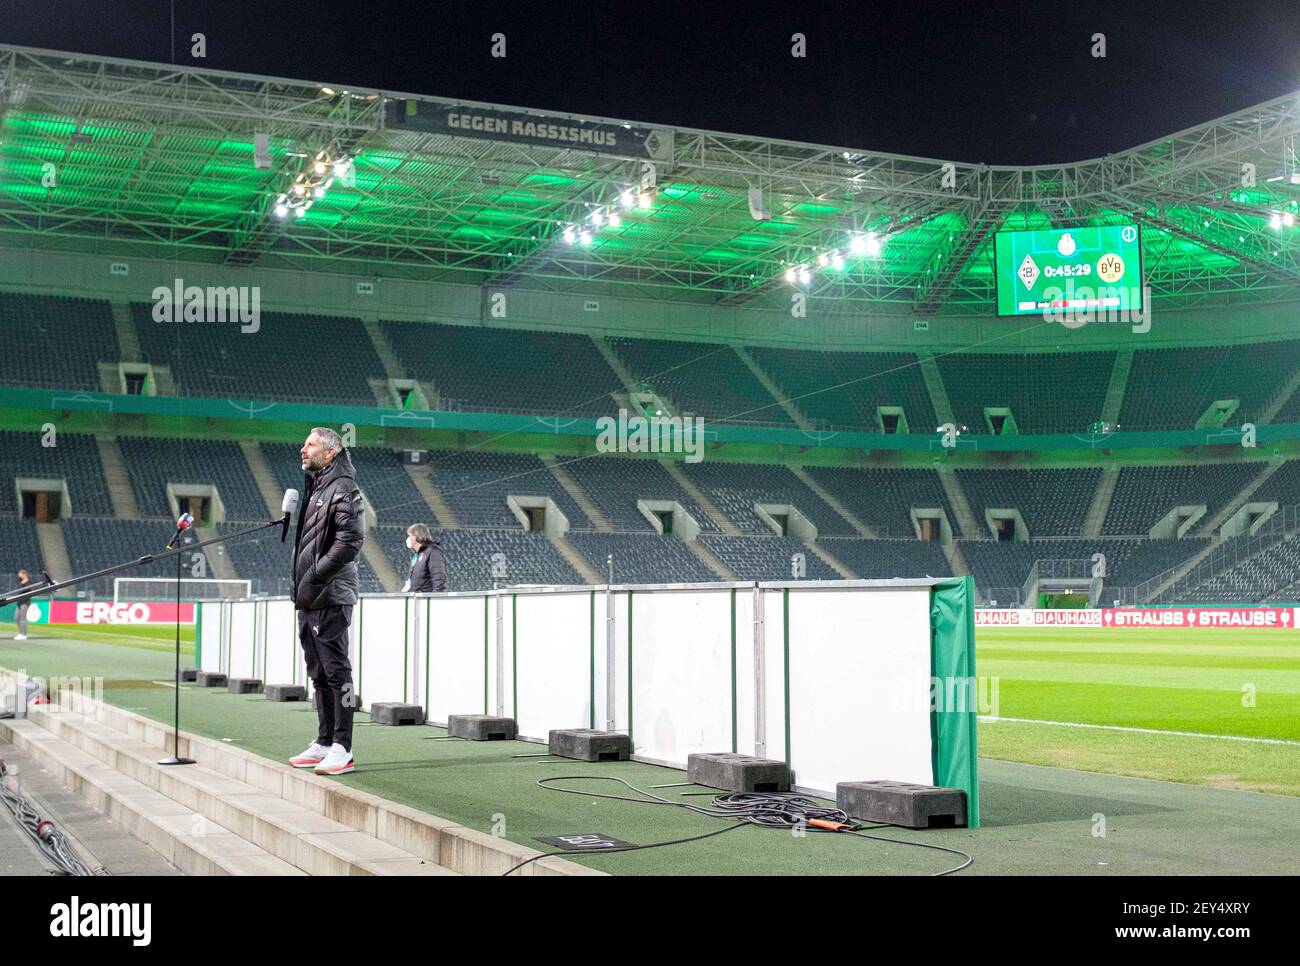 Feature, coach Marco ROSE (MG) during an interview in the empty stadium, football DFB Pokal quarter finals, Borussia Monchengladbach (MG) - Borussia Dortmund (DO) 0: 1, on 02.03.2021 in Borussia Monchengladbach/Germany. Â | usage worldwide Stock Photo